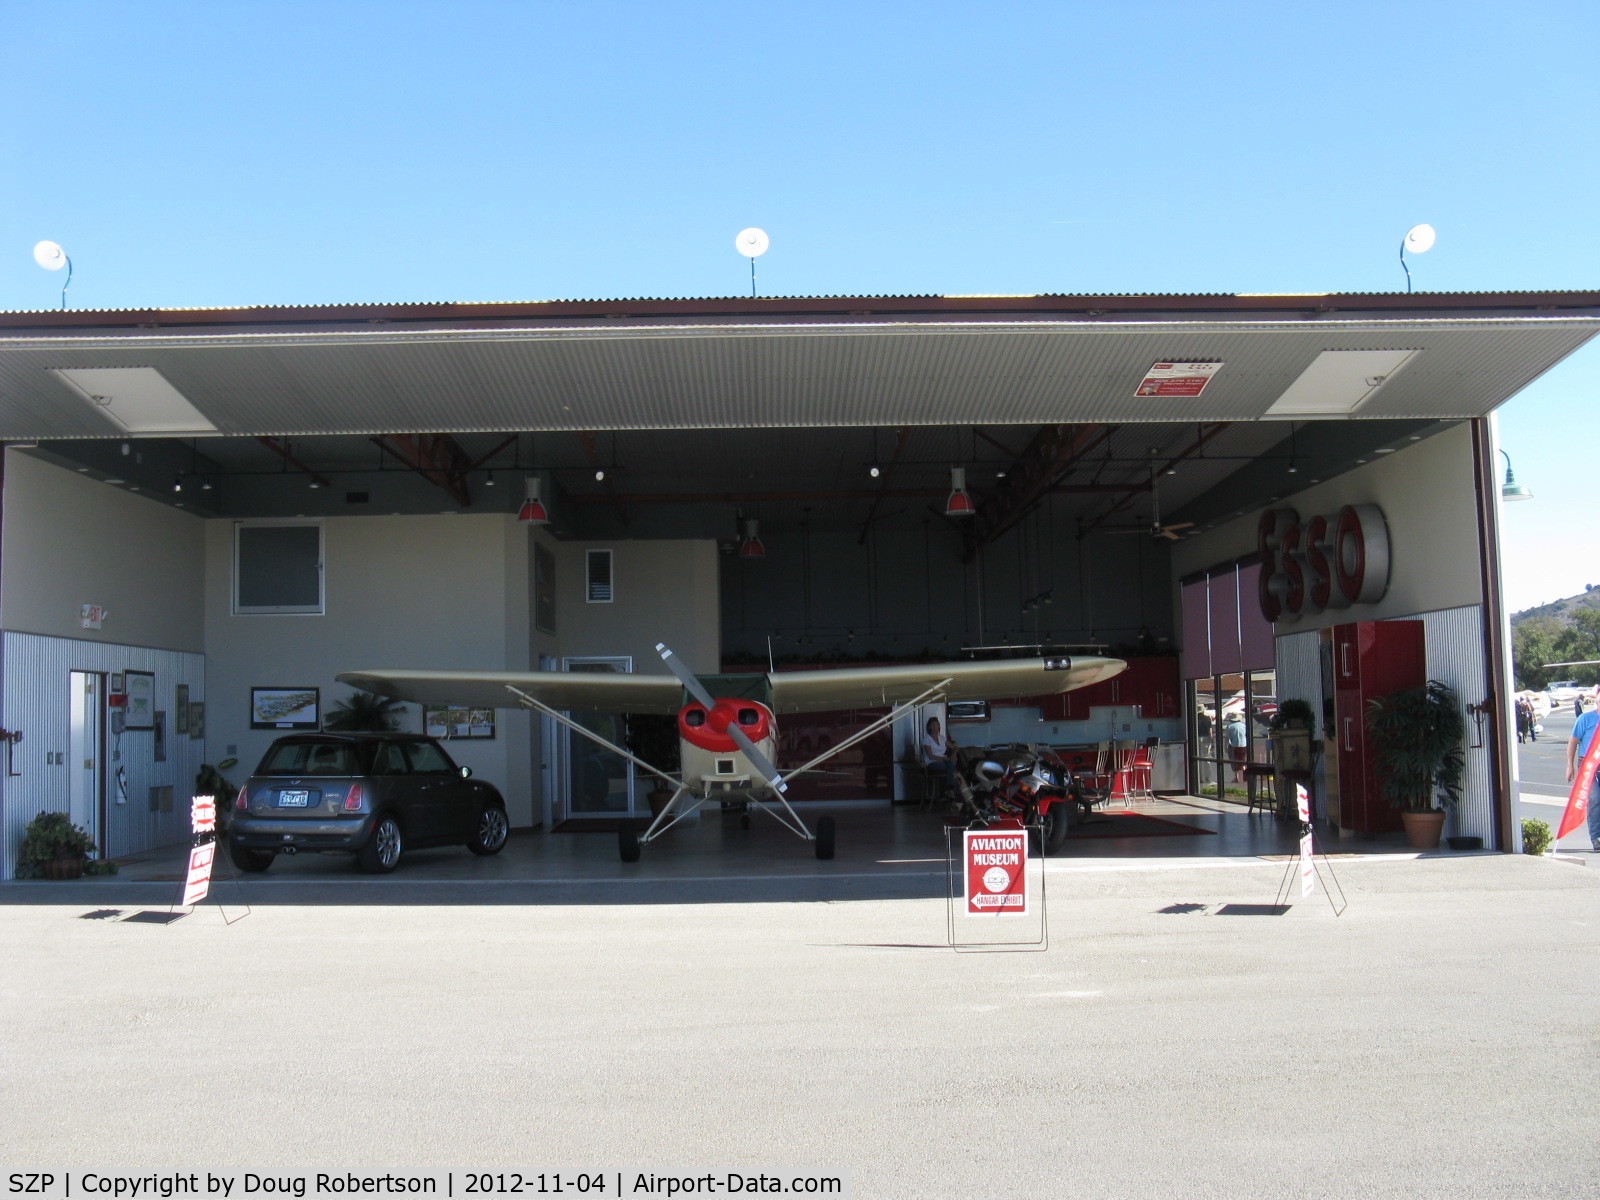 Santa Paula Airport (SZP) - Large Deluxe Hangar FOR SALE on corner of Curtiss taxiway and Museum taxiway. Prime midfield location near Fuel Dock. Bifold full-span door open.